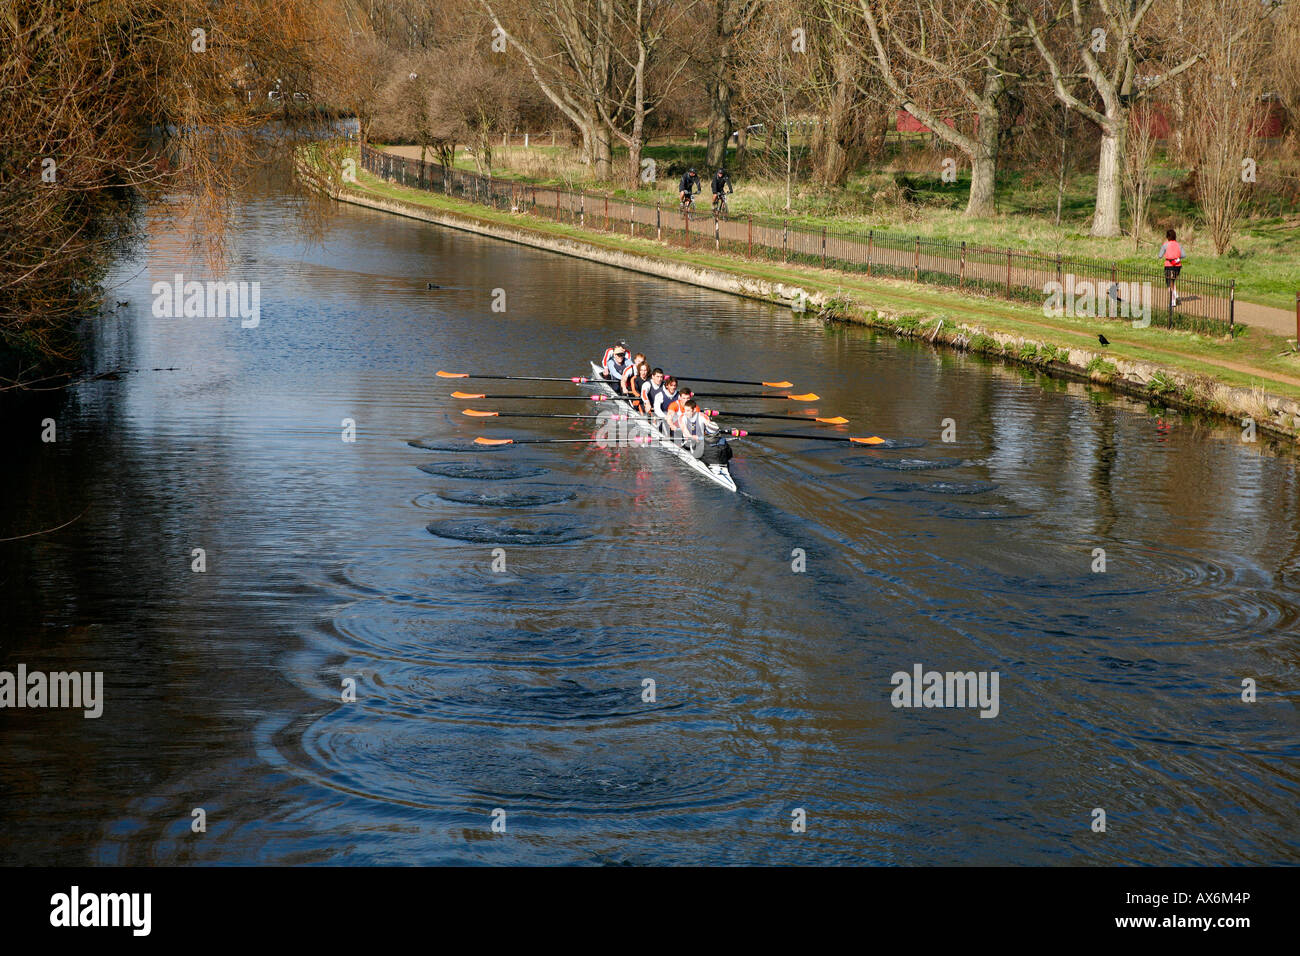 Rowers on the River Lea at Clapton Park, London Stock Photo